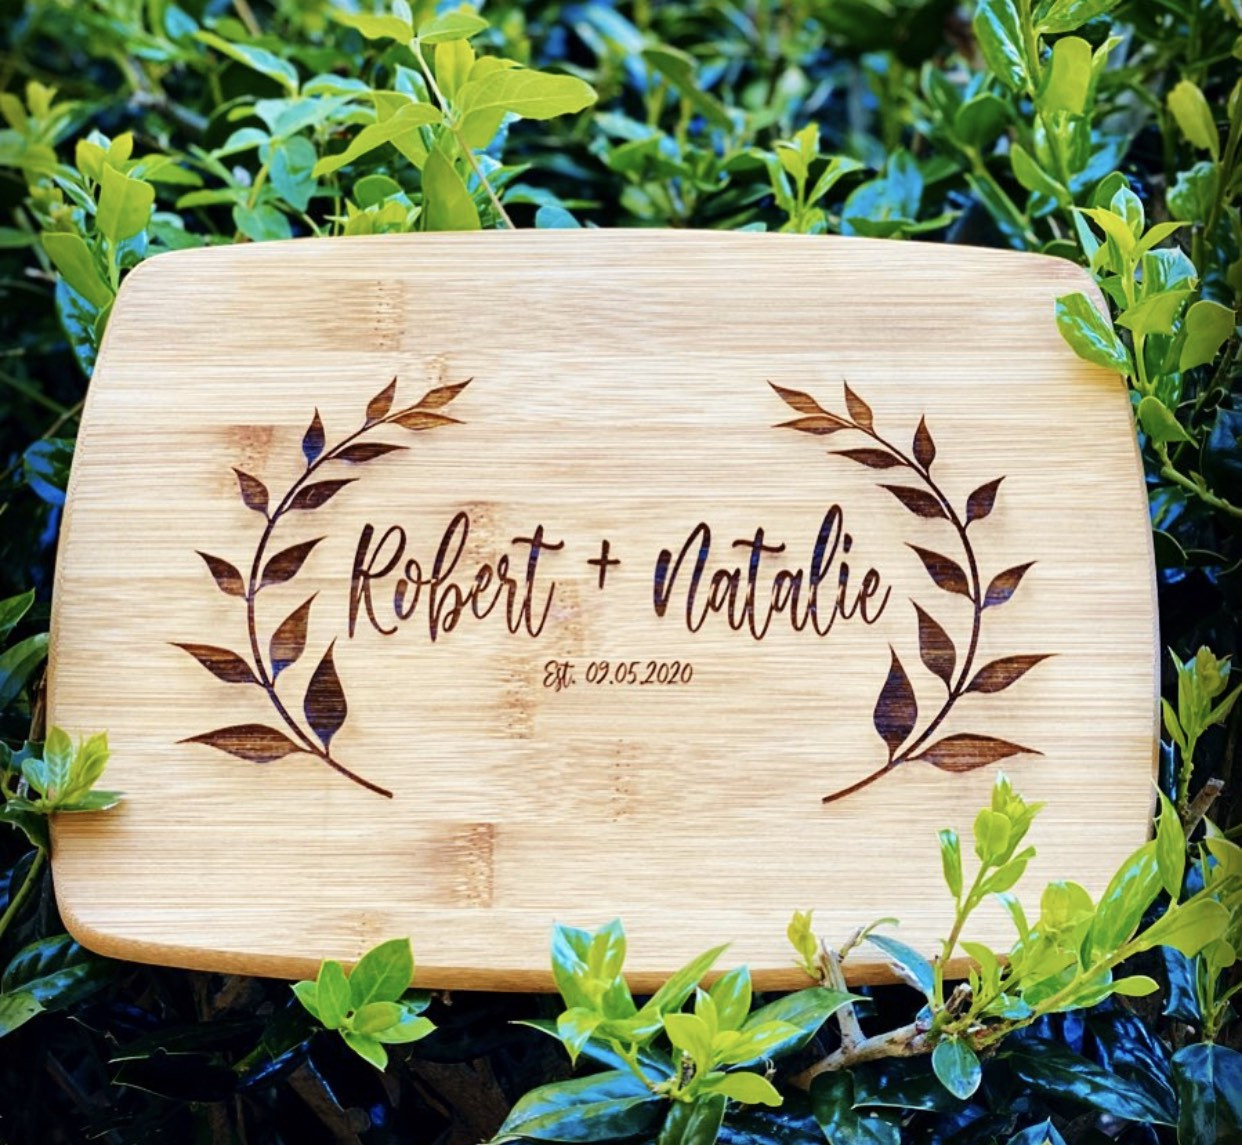 Custom Cutting Board Personalized  Wooden Wedding Gift - Forest Decor